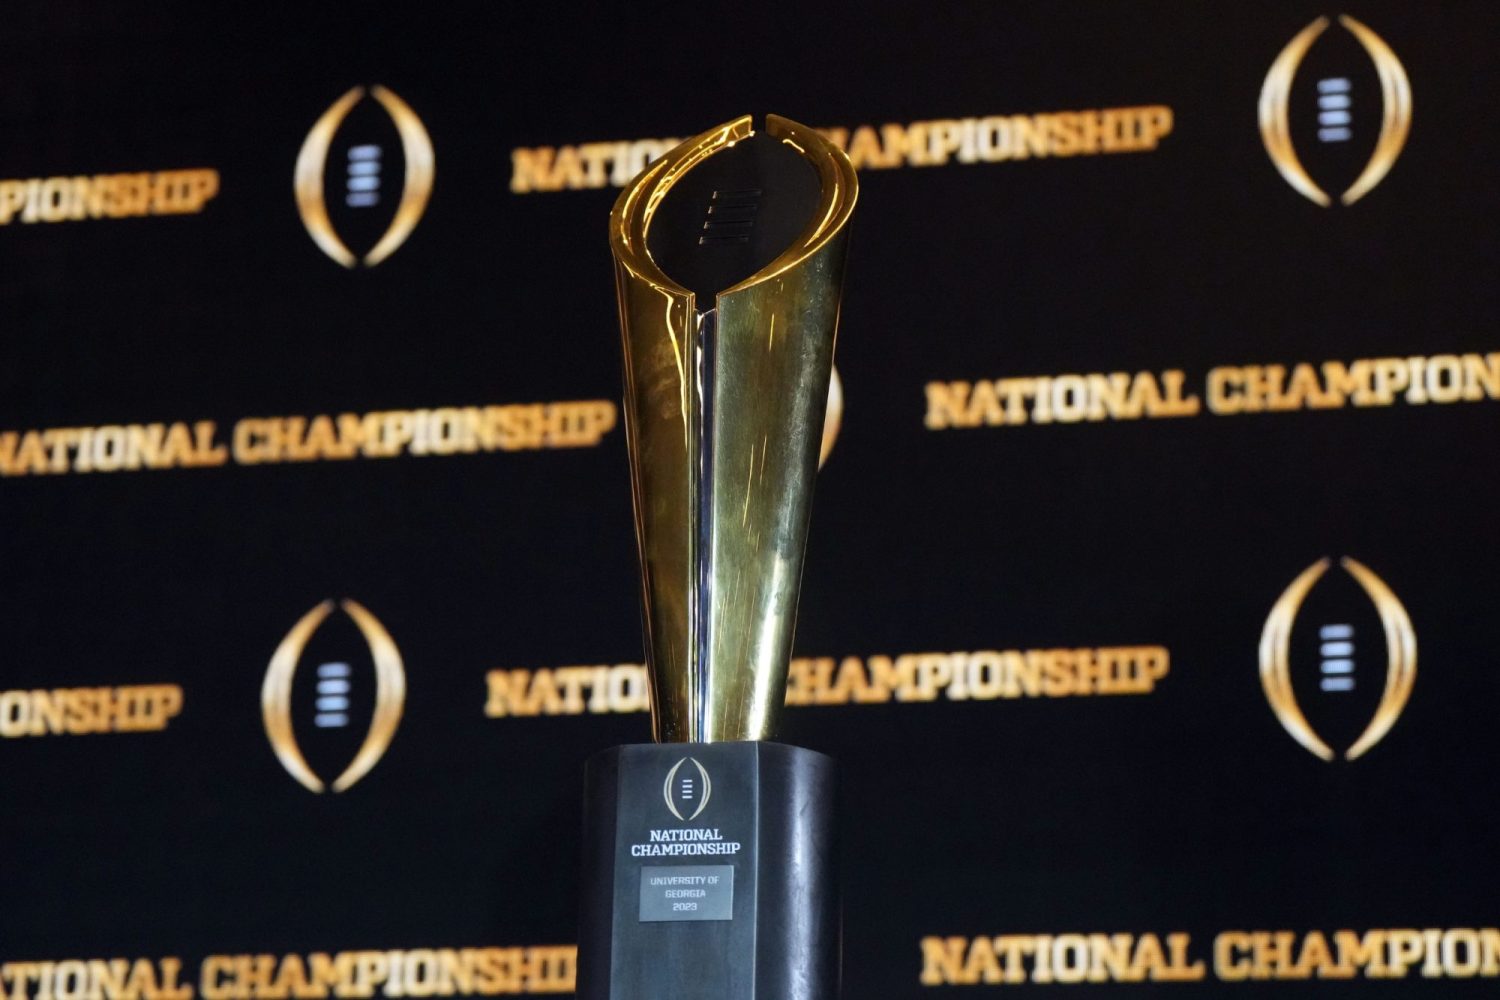 The College Football Playoff National Championship trophy at CFP Champions press conference at Los Angeles Airport Marriott.